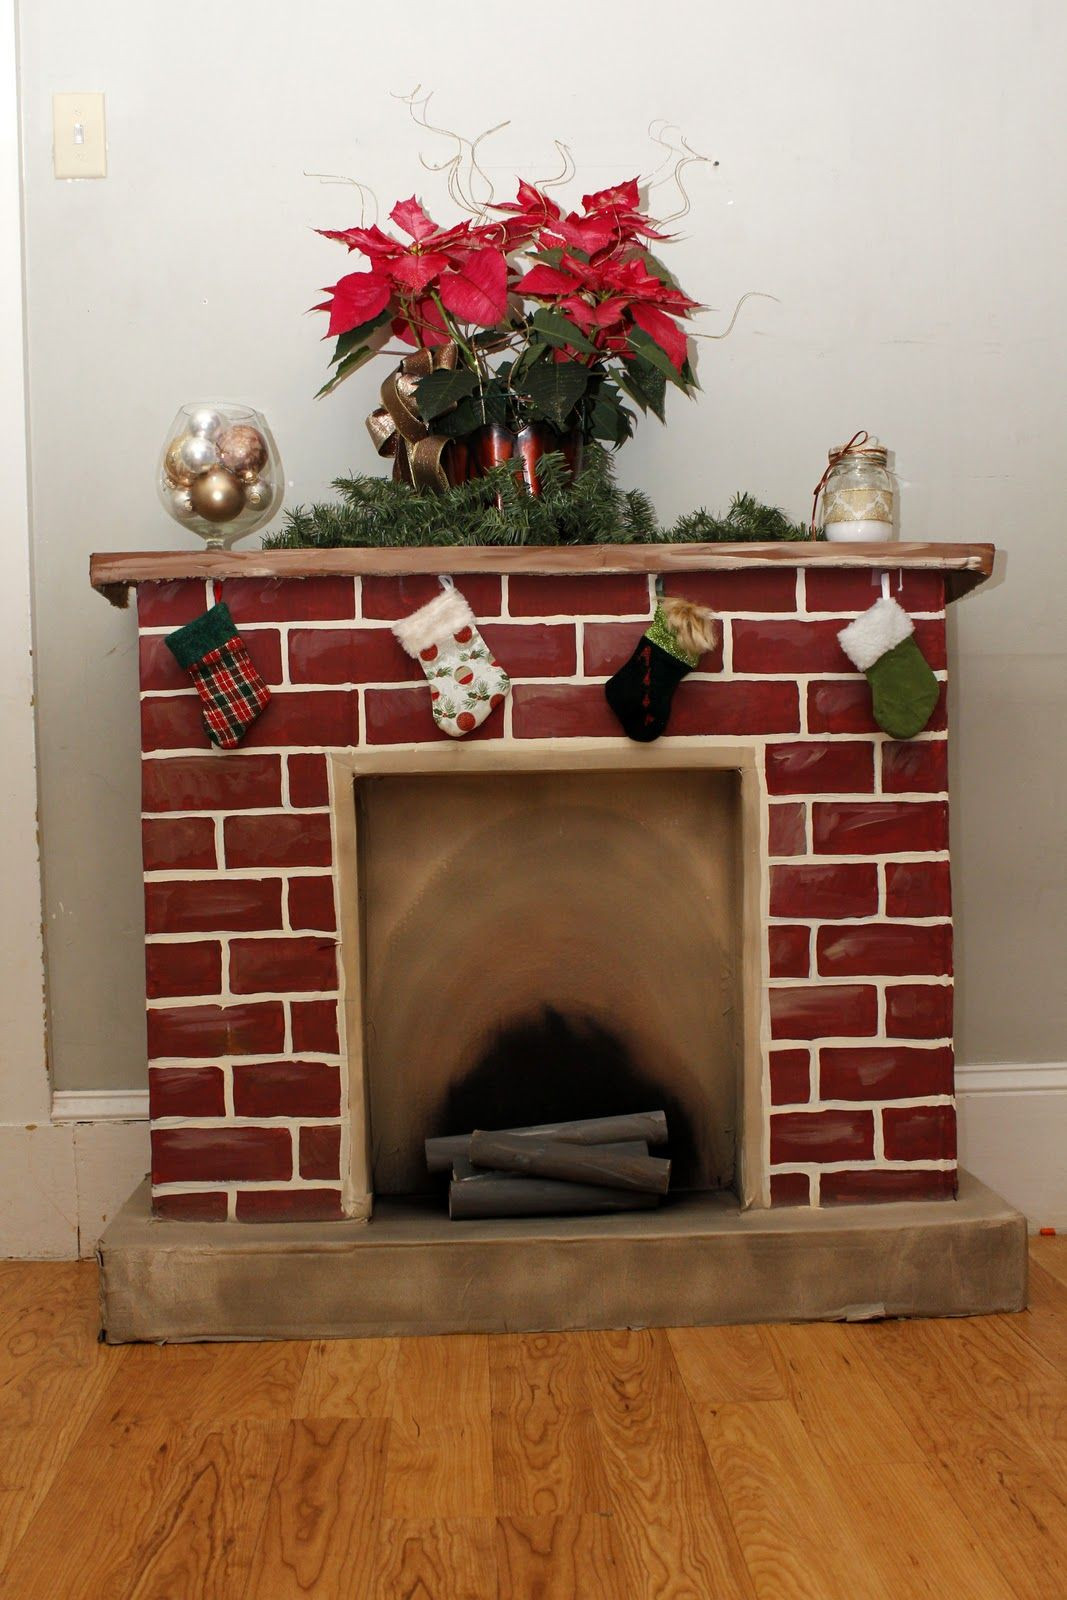 DIY Cardboard Decor
 Have you ever seen these little cardboard fireplaces